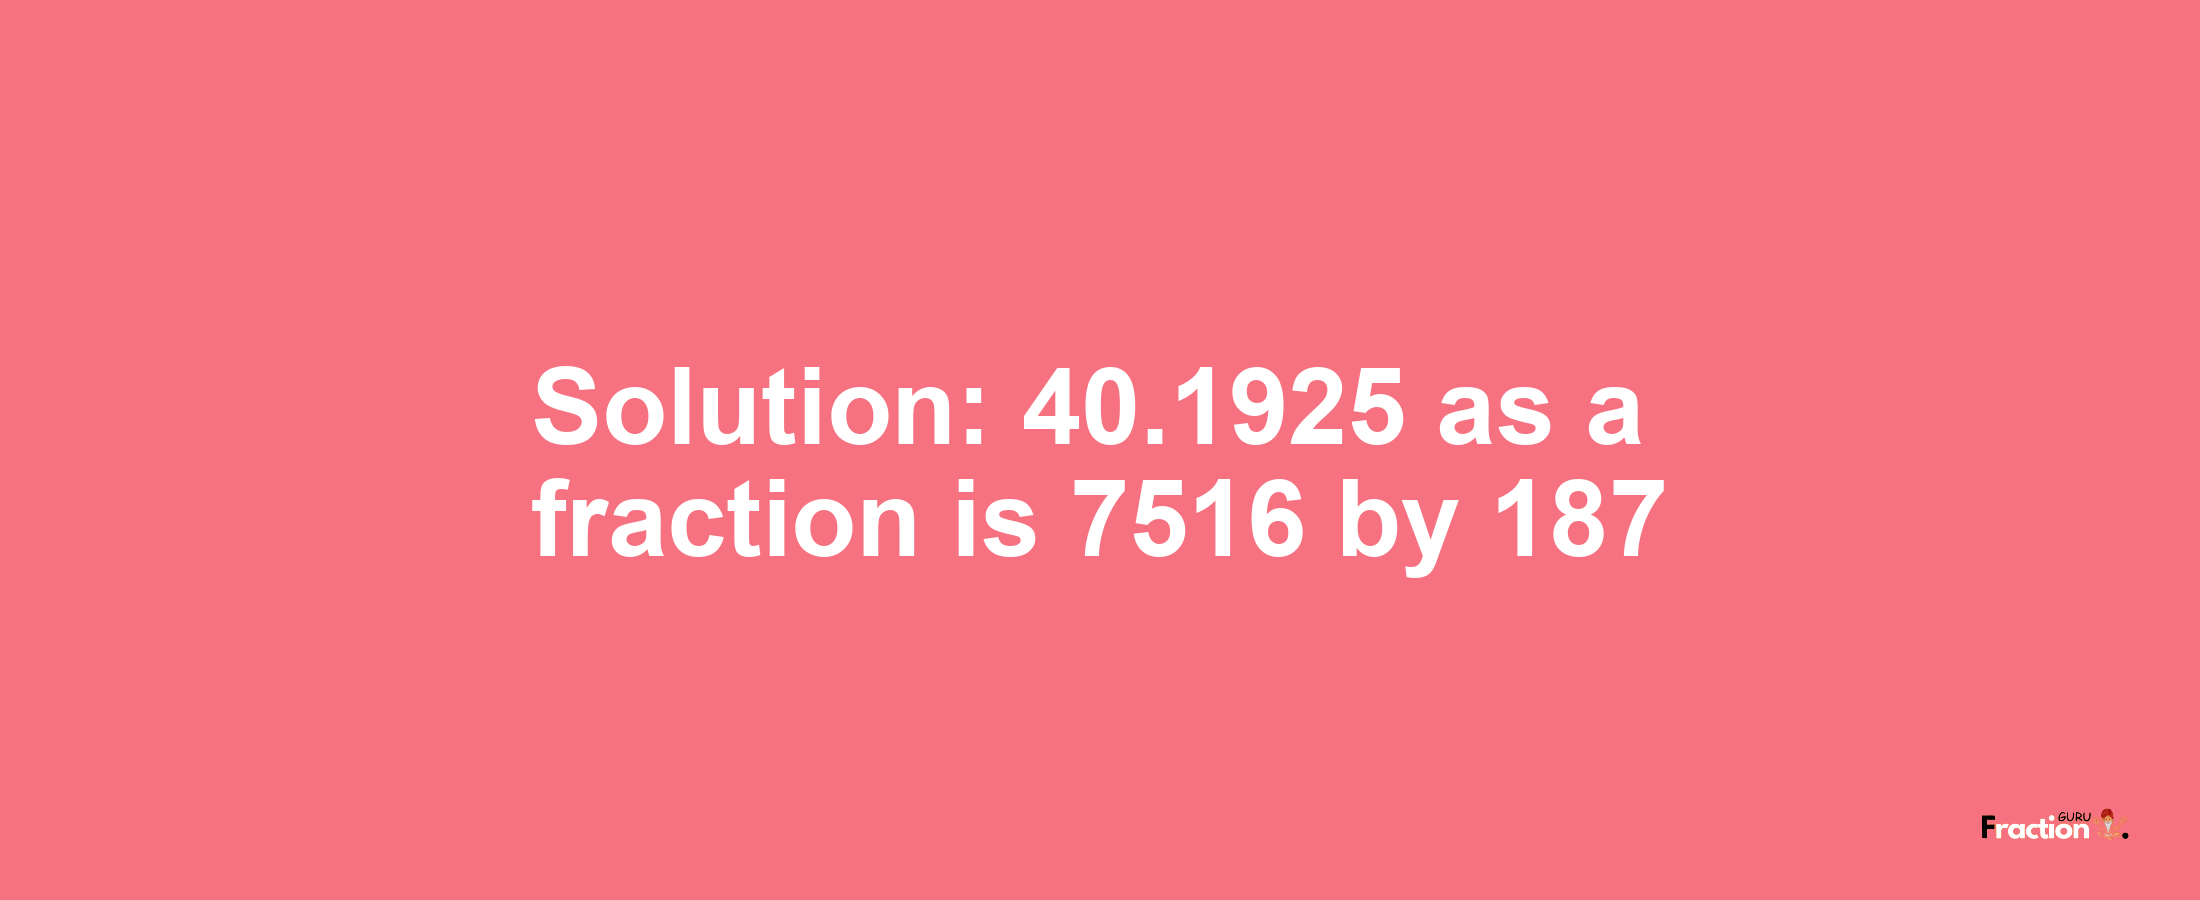 Solution:40.1925 as a fraction is 7516/187